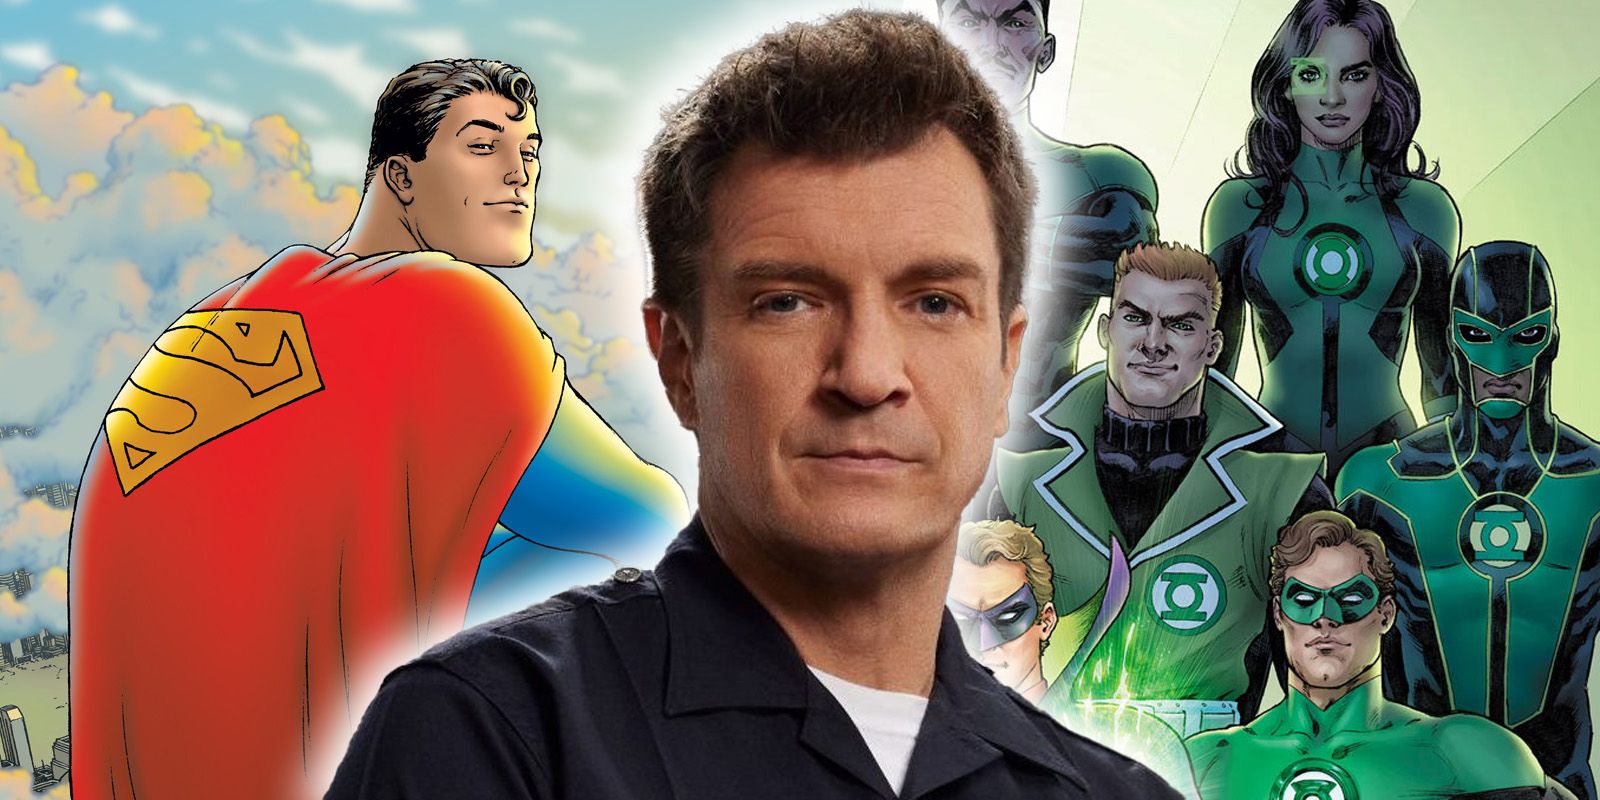 Nathan Fillion in the foreground of images of DC Comics' Superman and Green Lantern